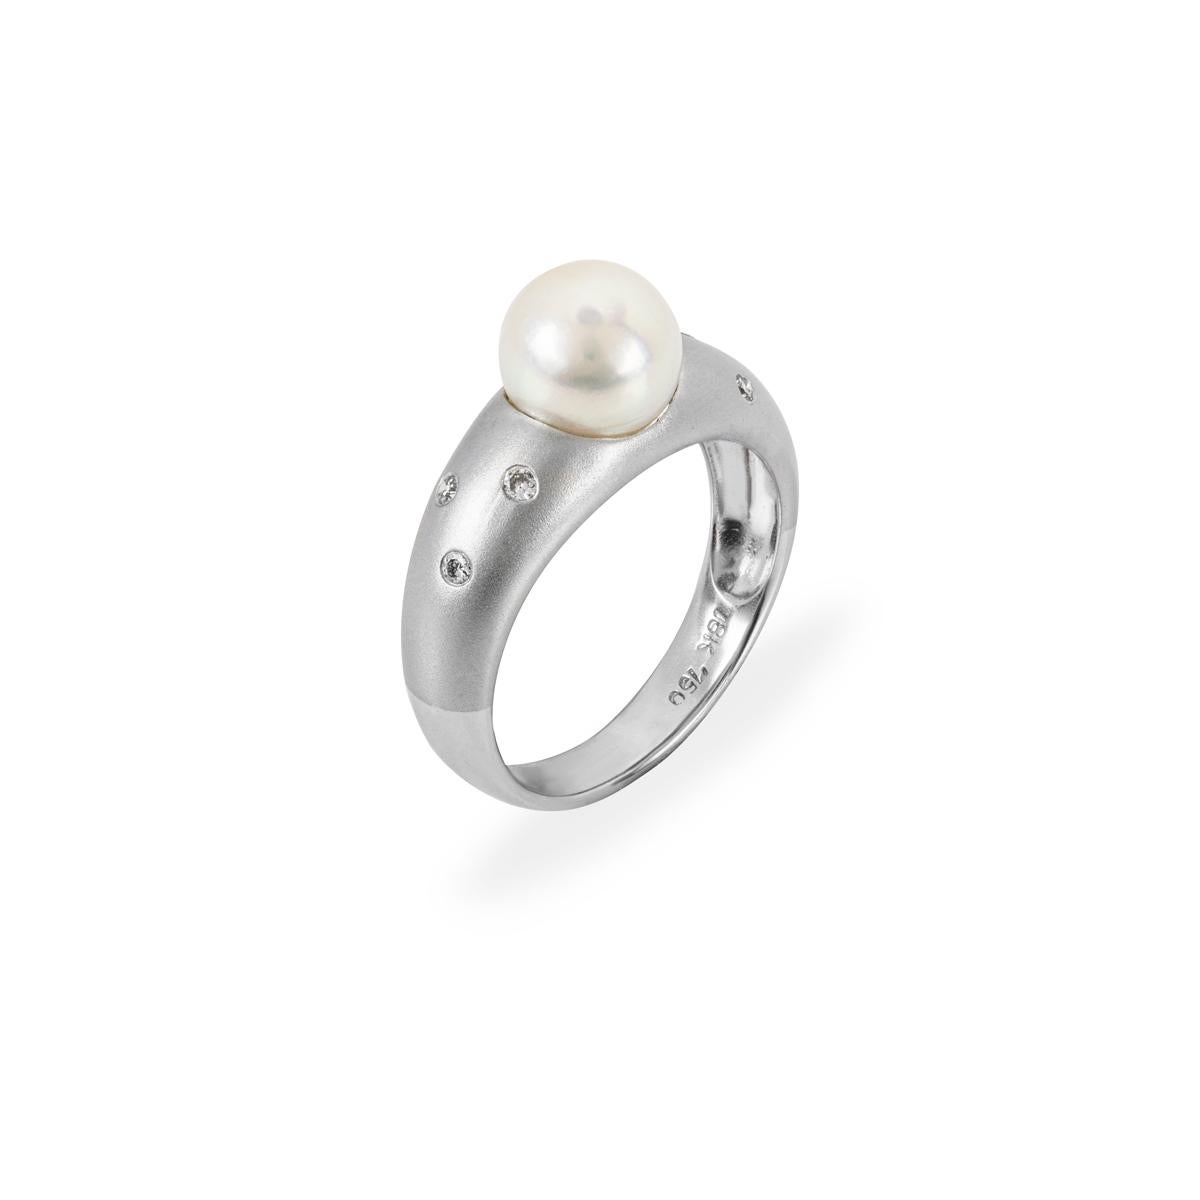 A beautiful 18k white gold cultured pearl and diamond dress ring. The dress ring features a white cultured pearl with a light pink overtone set to the centre measuring 7.8mm wide. Complementing the pearl are 6 round brilliant cut diamonds set to the